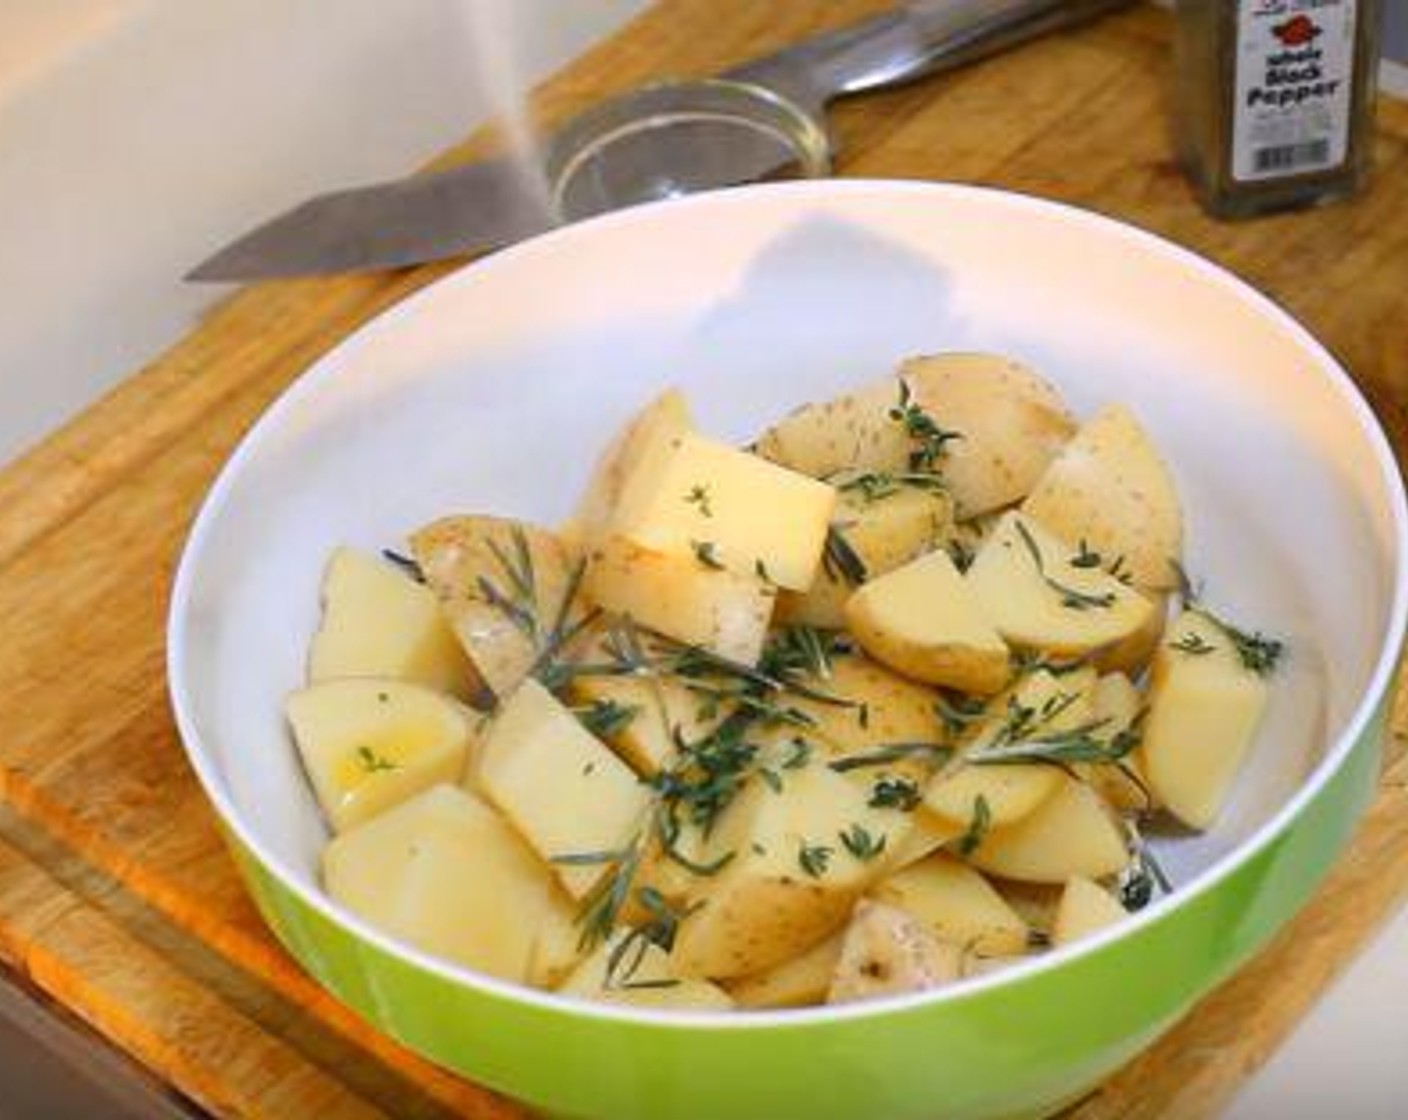 step 3 Cut the Potatoes (4) into pieces, the smaller the crispier. In a bowl, add the potatoes, the Fresh Rosemary (1 sprig) the Fresh Thyme Leaves (2 sprigs), and the Olive Oil (2 Tbsp). Season with Salt (to taste) and Ground Black Pepper (to taste). Mix thoroughly.